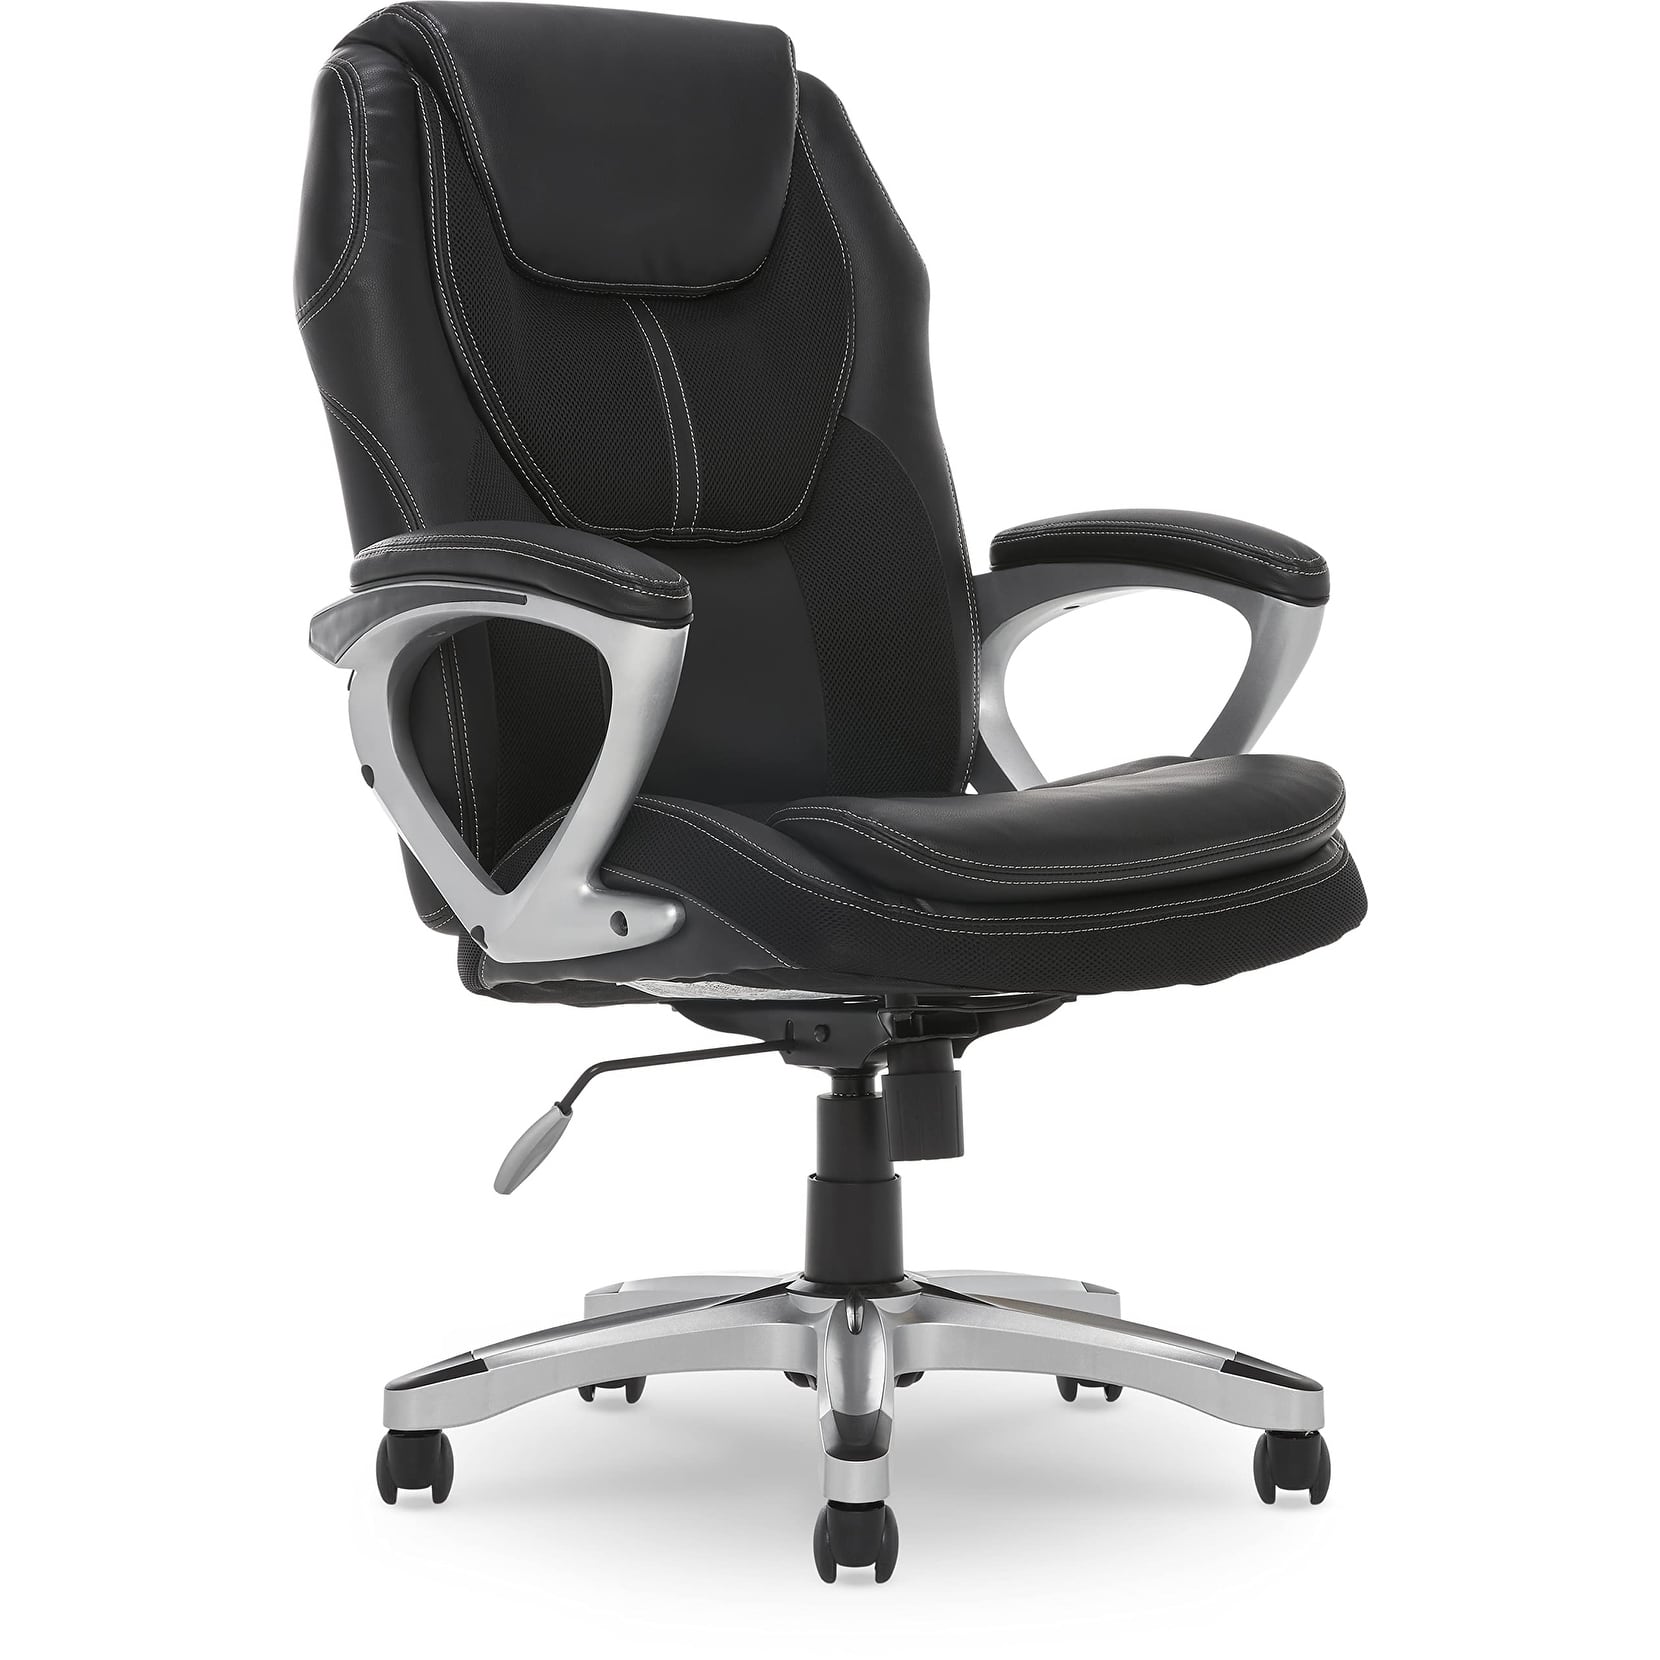 Executive Office Padded Arms, Adjustable Ergonomic Gaming Desk Chair ...